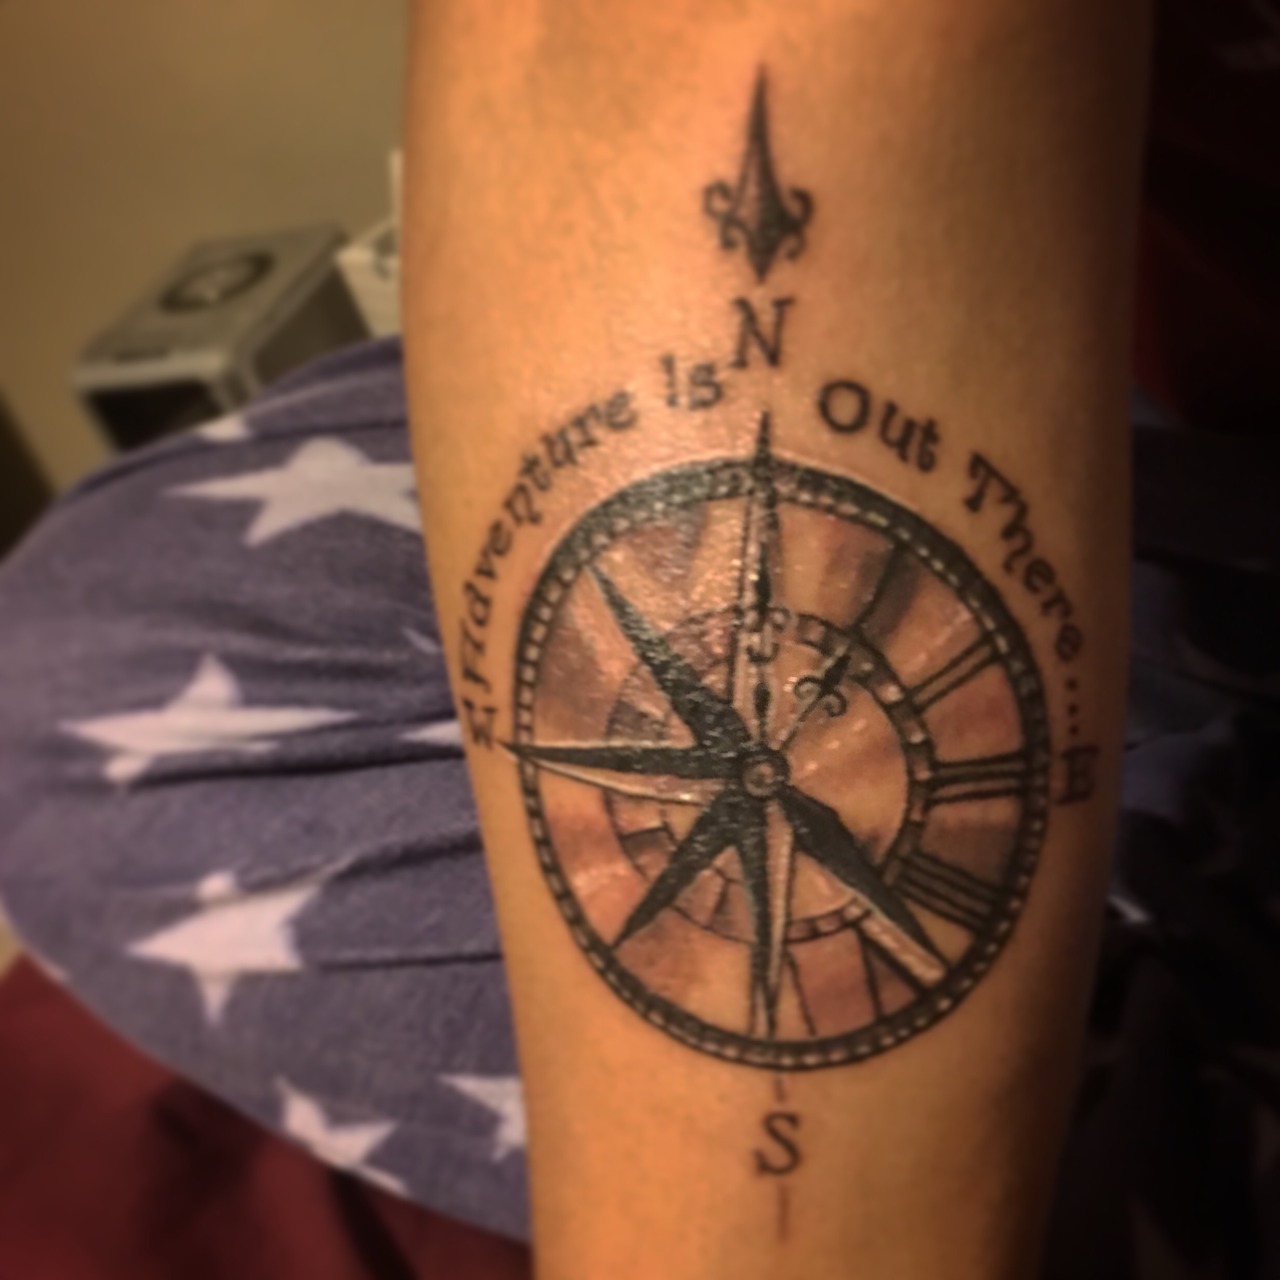 195 Compass Tattoos That Will Help You Find Your Way Home